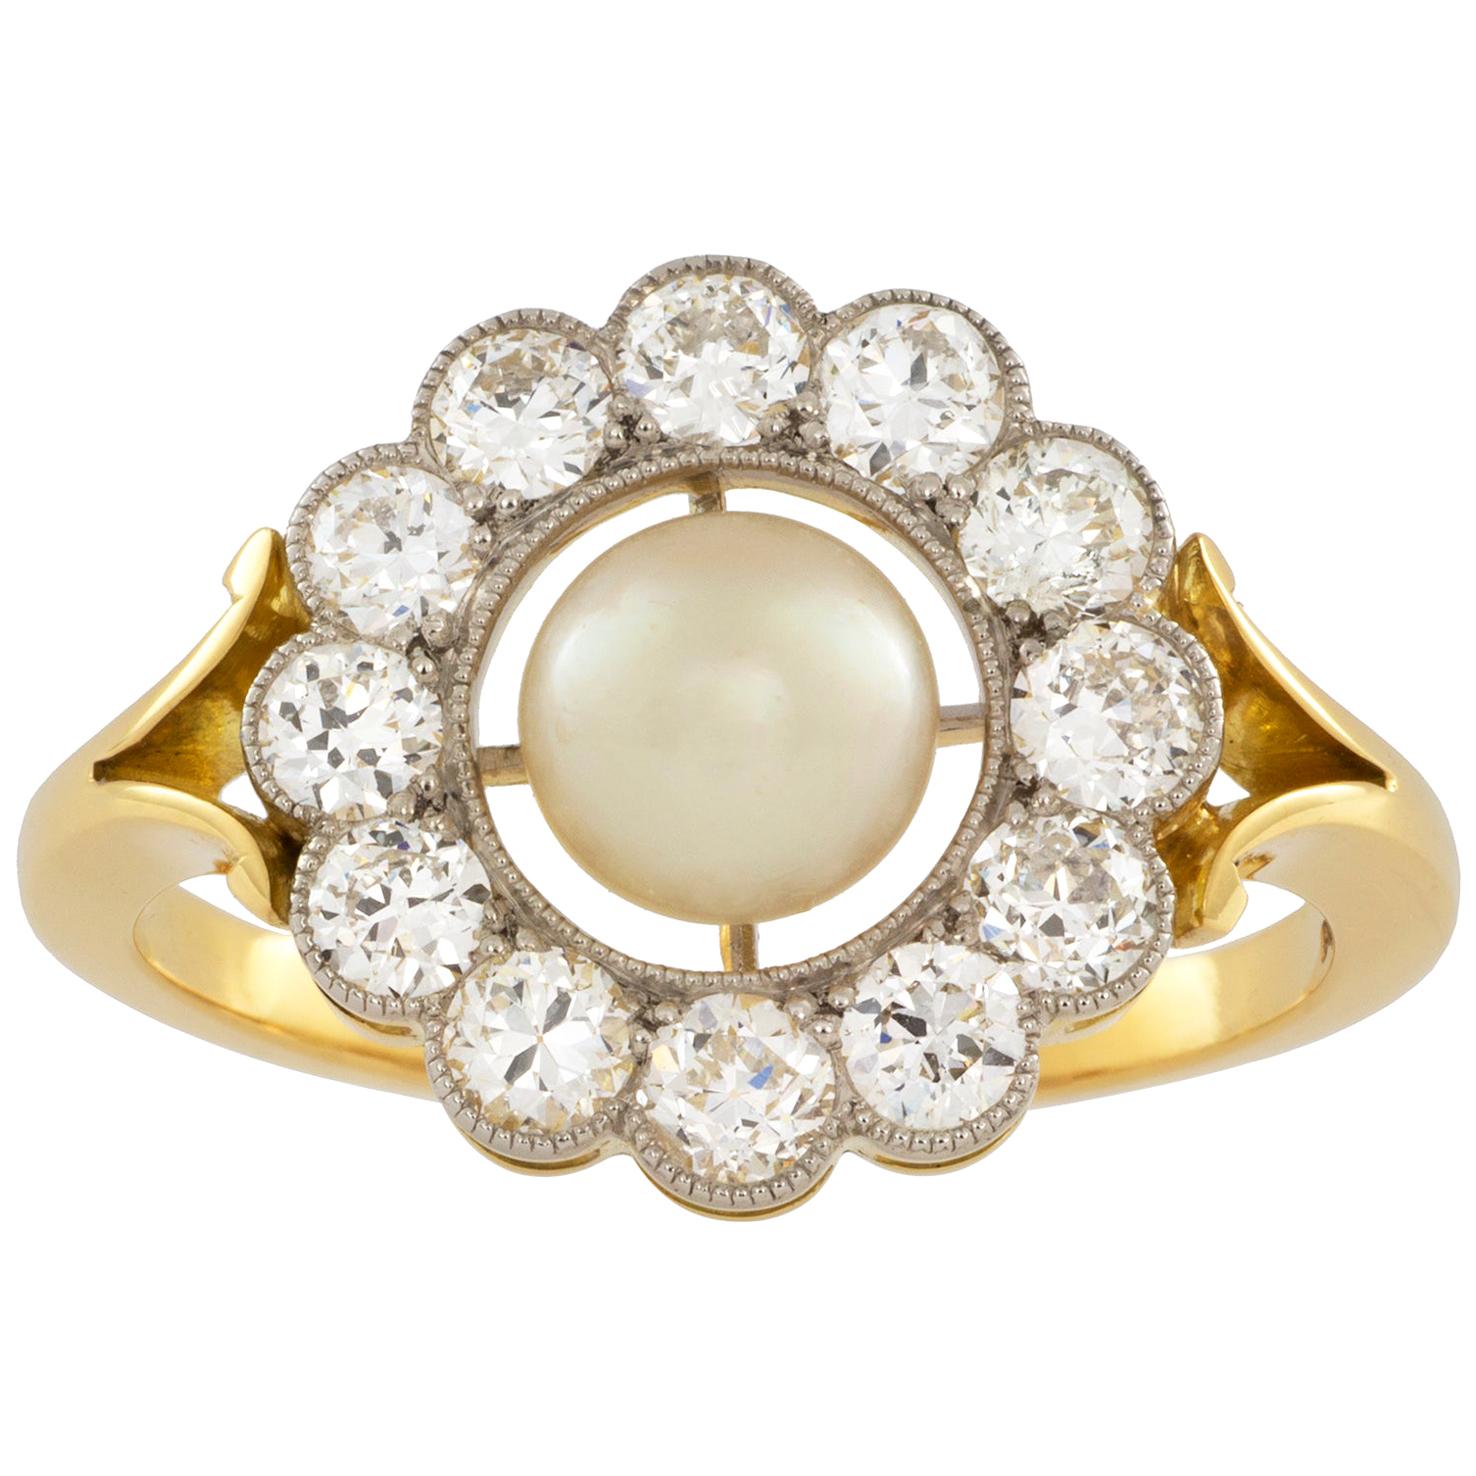 Natural Pearl and Diamond Cluster Ring